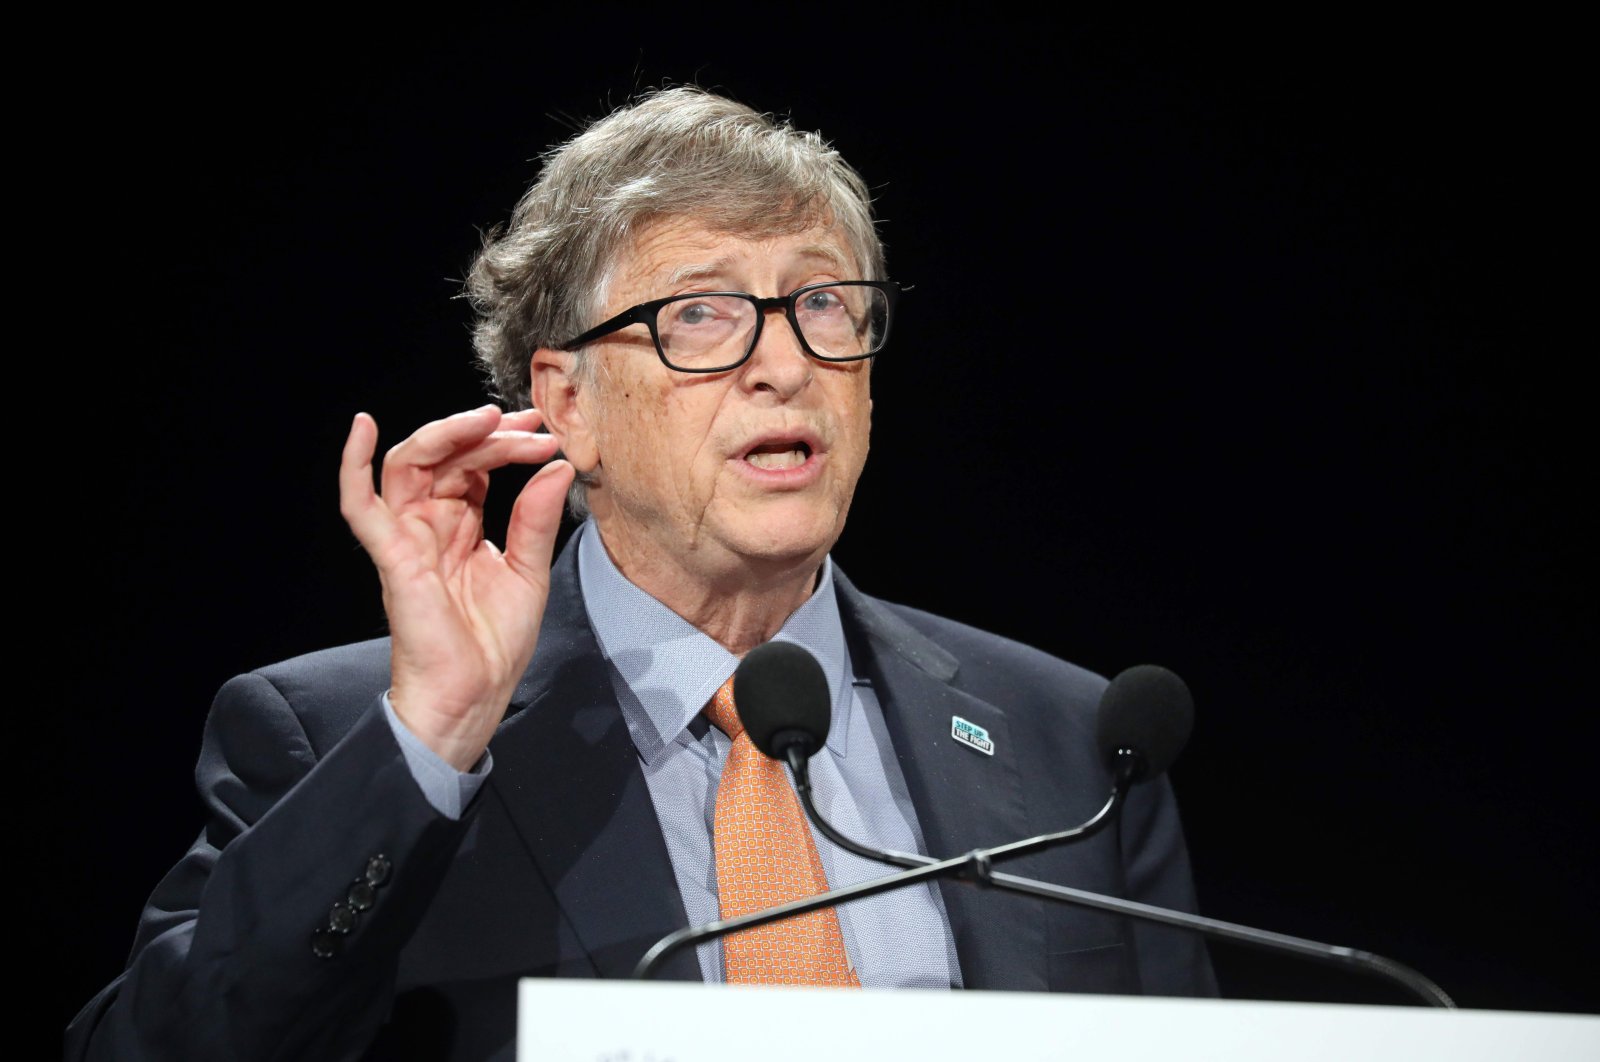 Microsoft founder Bill Gates delivers a speech during the conference of Global Fund to Fight HIV, Tuberculosis and Malaria in Lyon, central-eastern France, on Oct. 10, 2019. (AFP Photo)